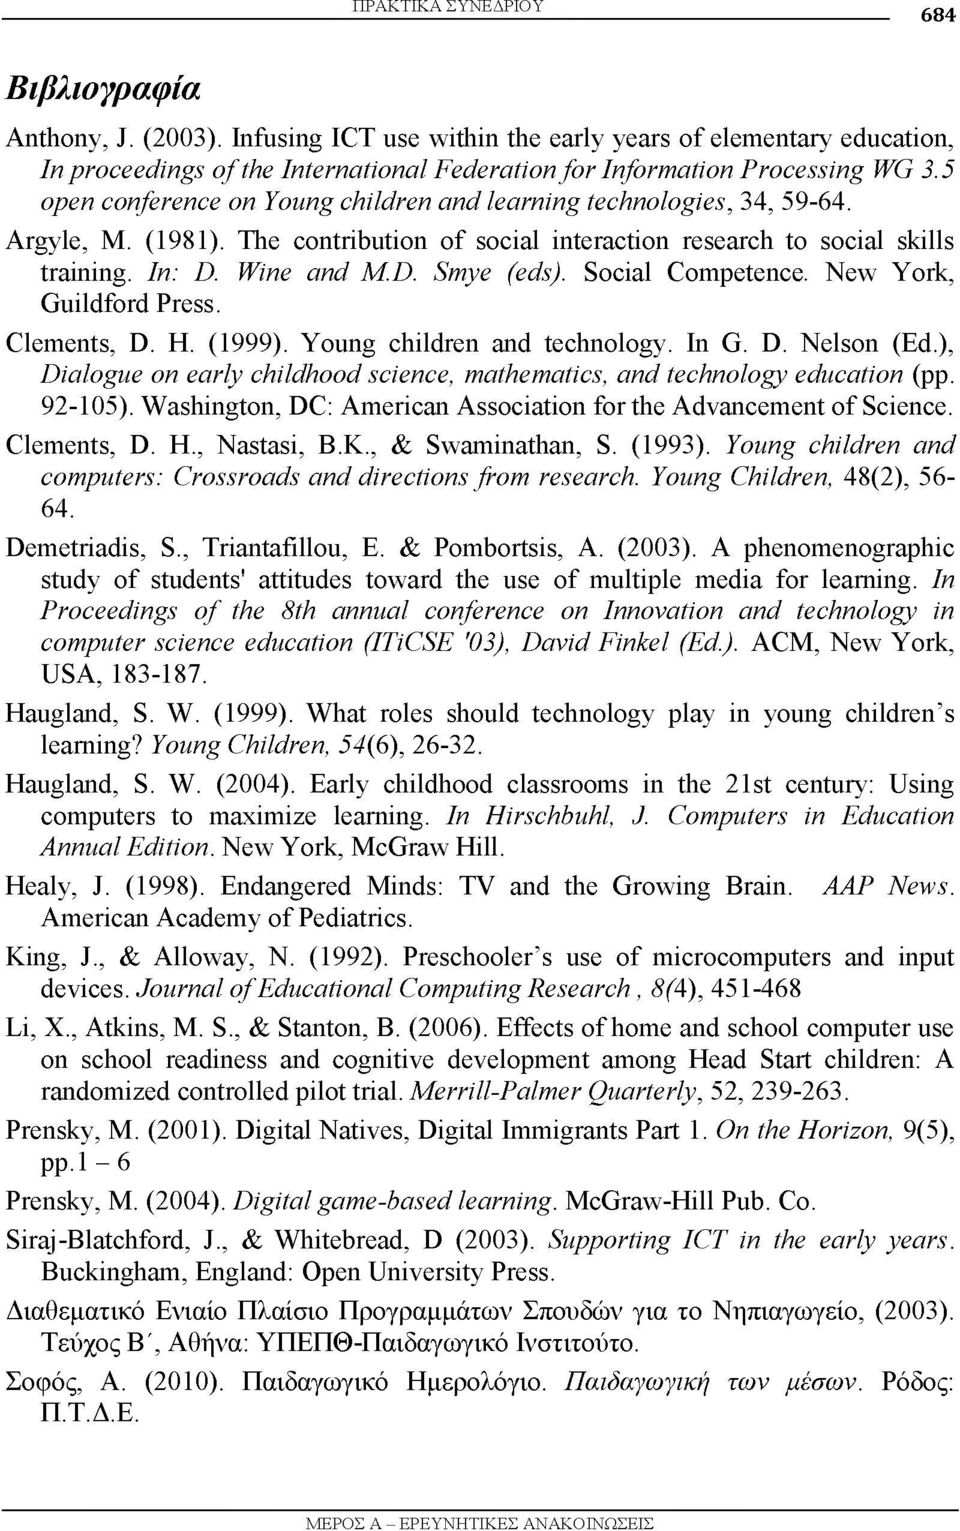 5 open conference on Young children and learning technologies, 34, 59-64. Argyle, M. (1981). The contribution of social interaction research to social skills training. In: D. Wine and M.D. Smye (eds).